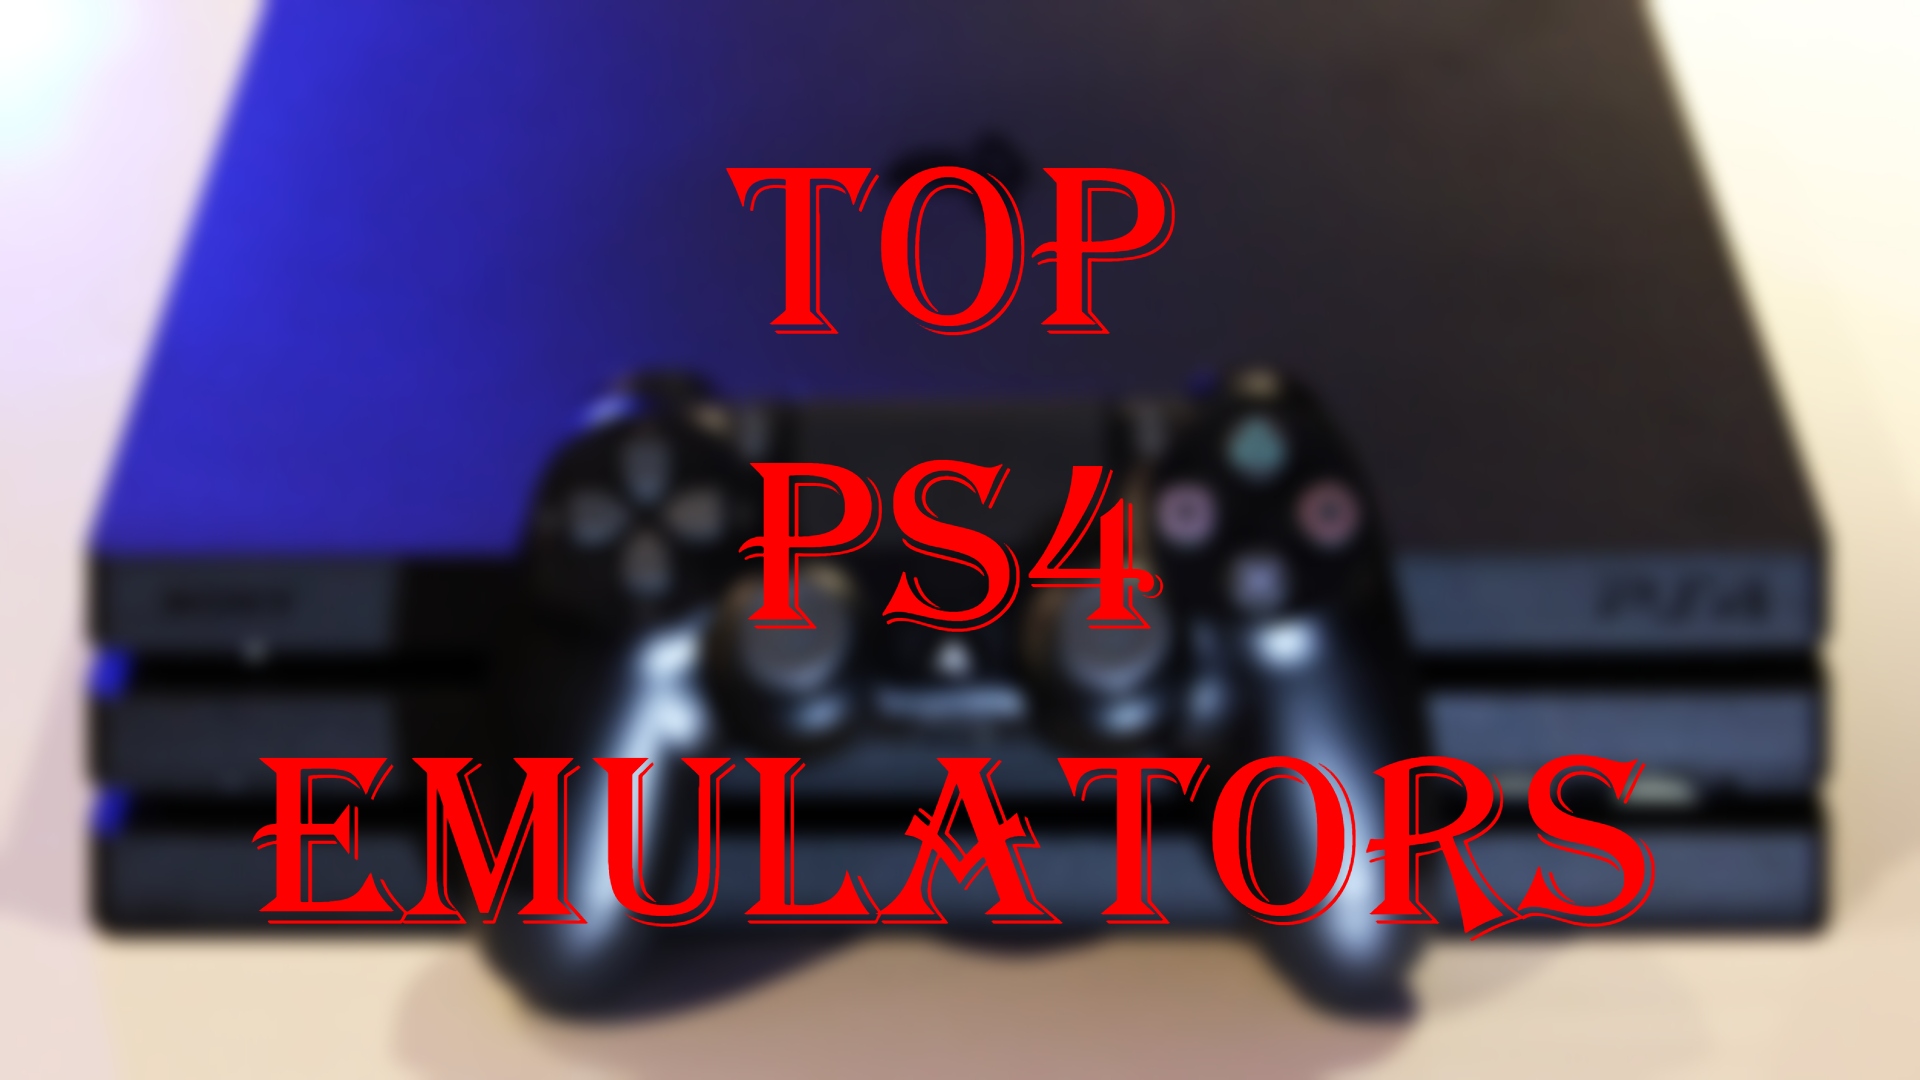 is there a mac emulator for ps4?